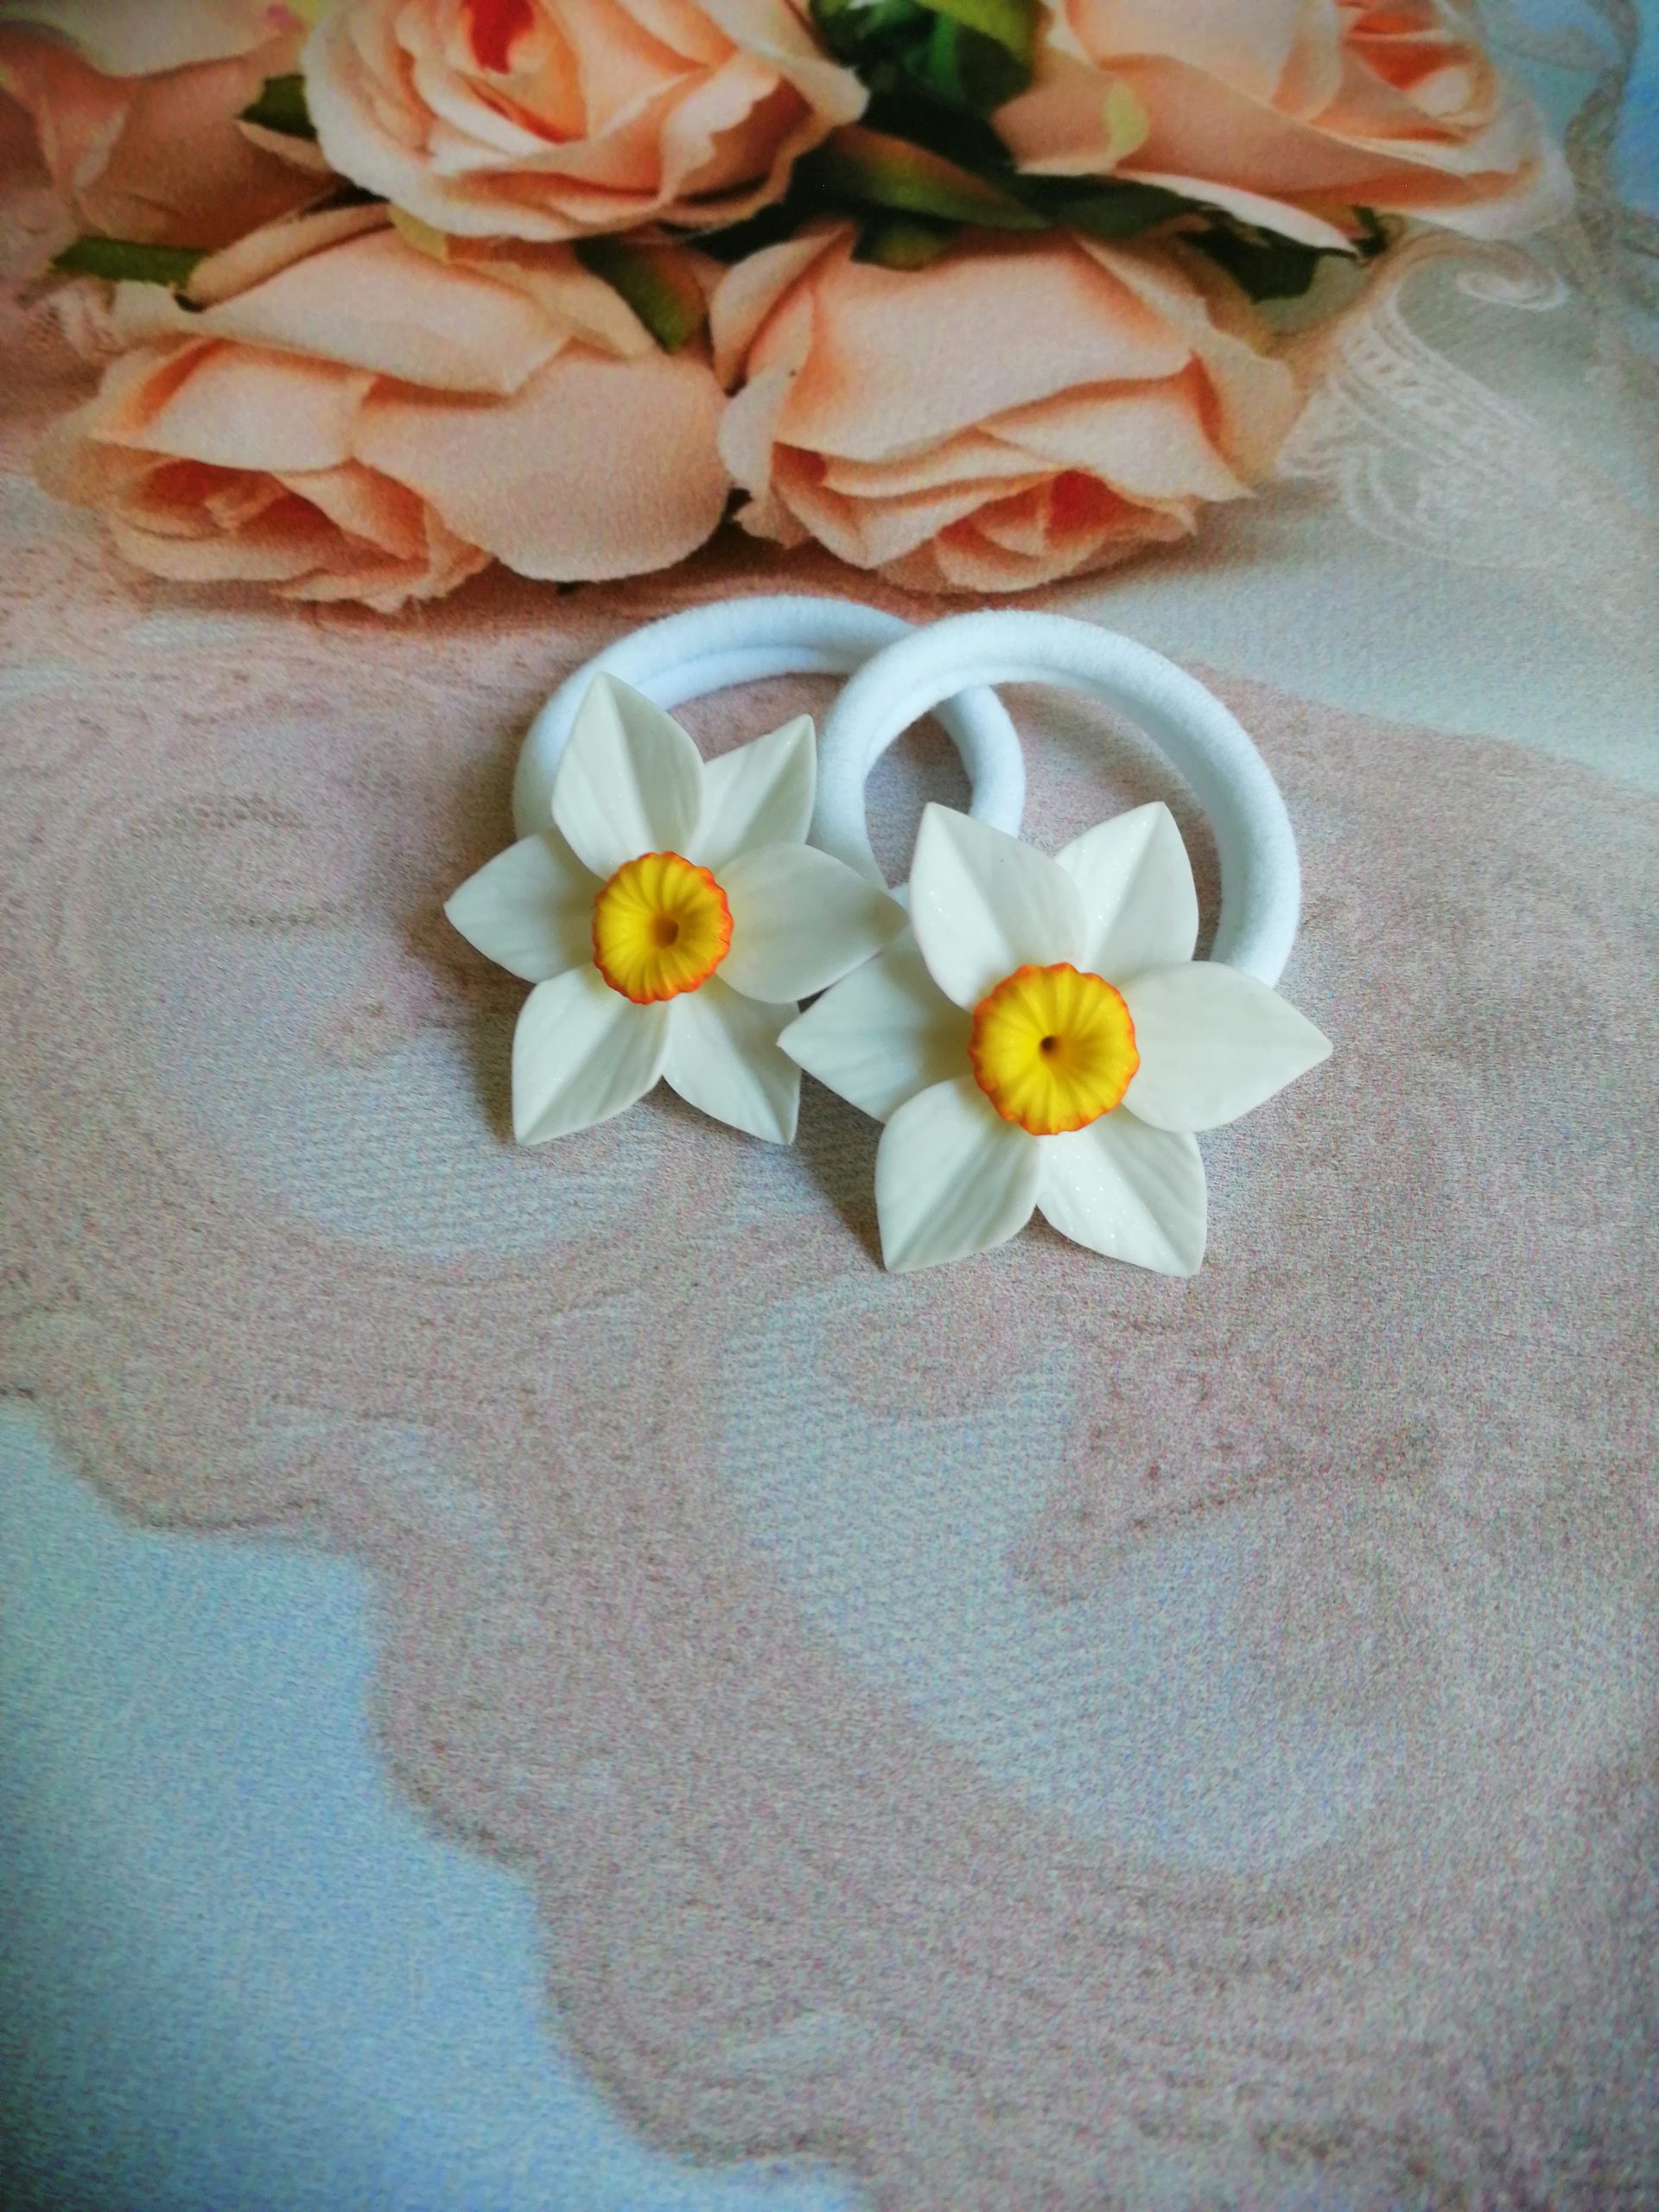 hair band with flowers